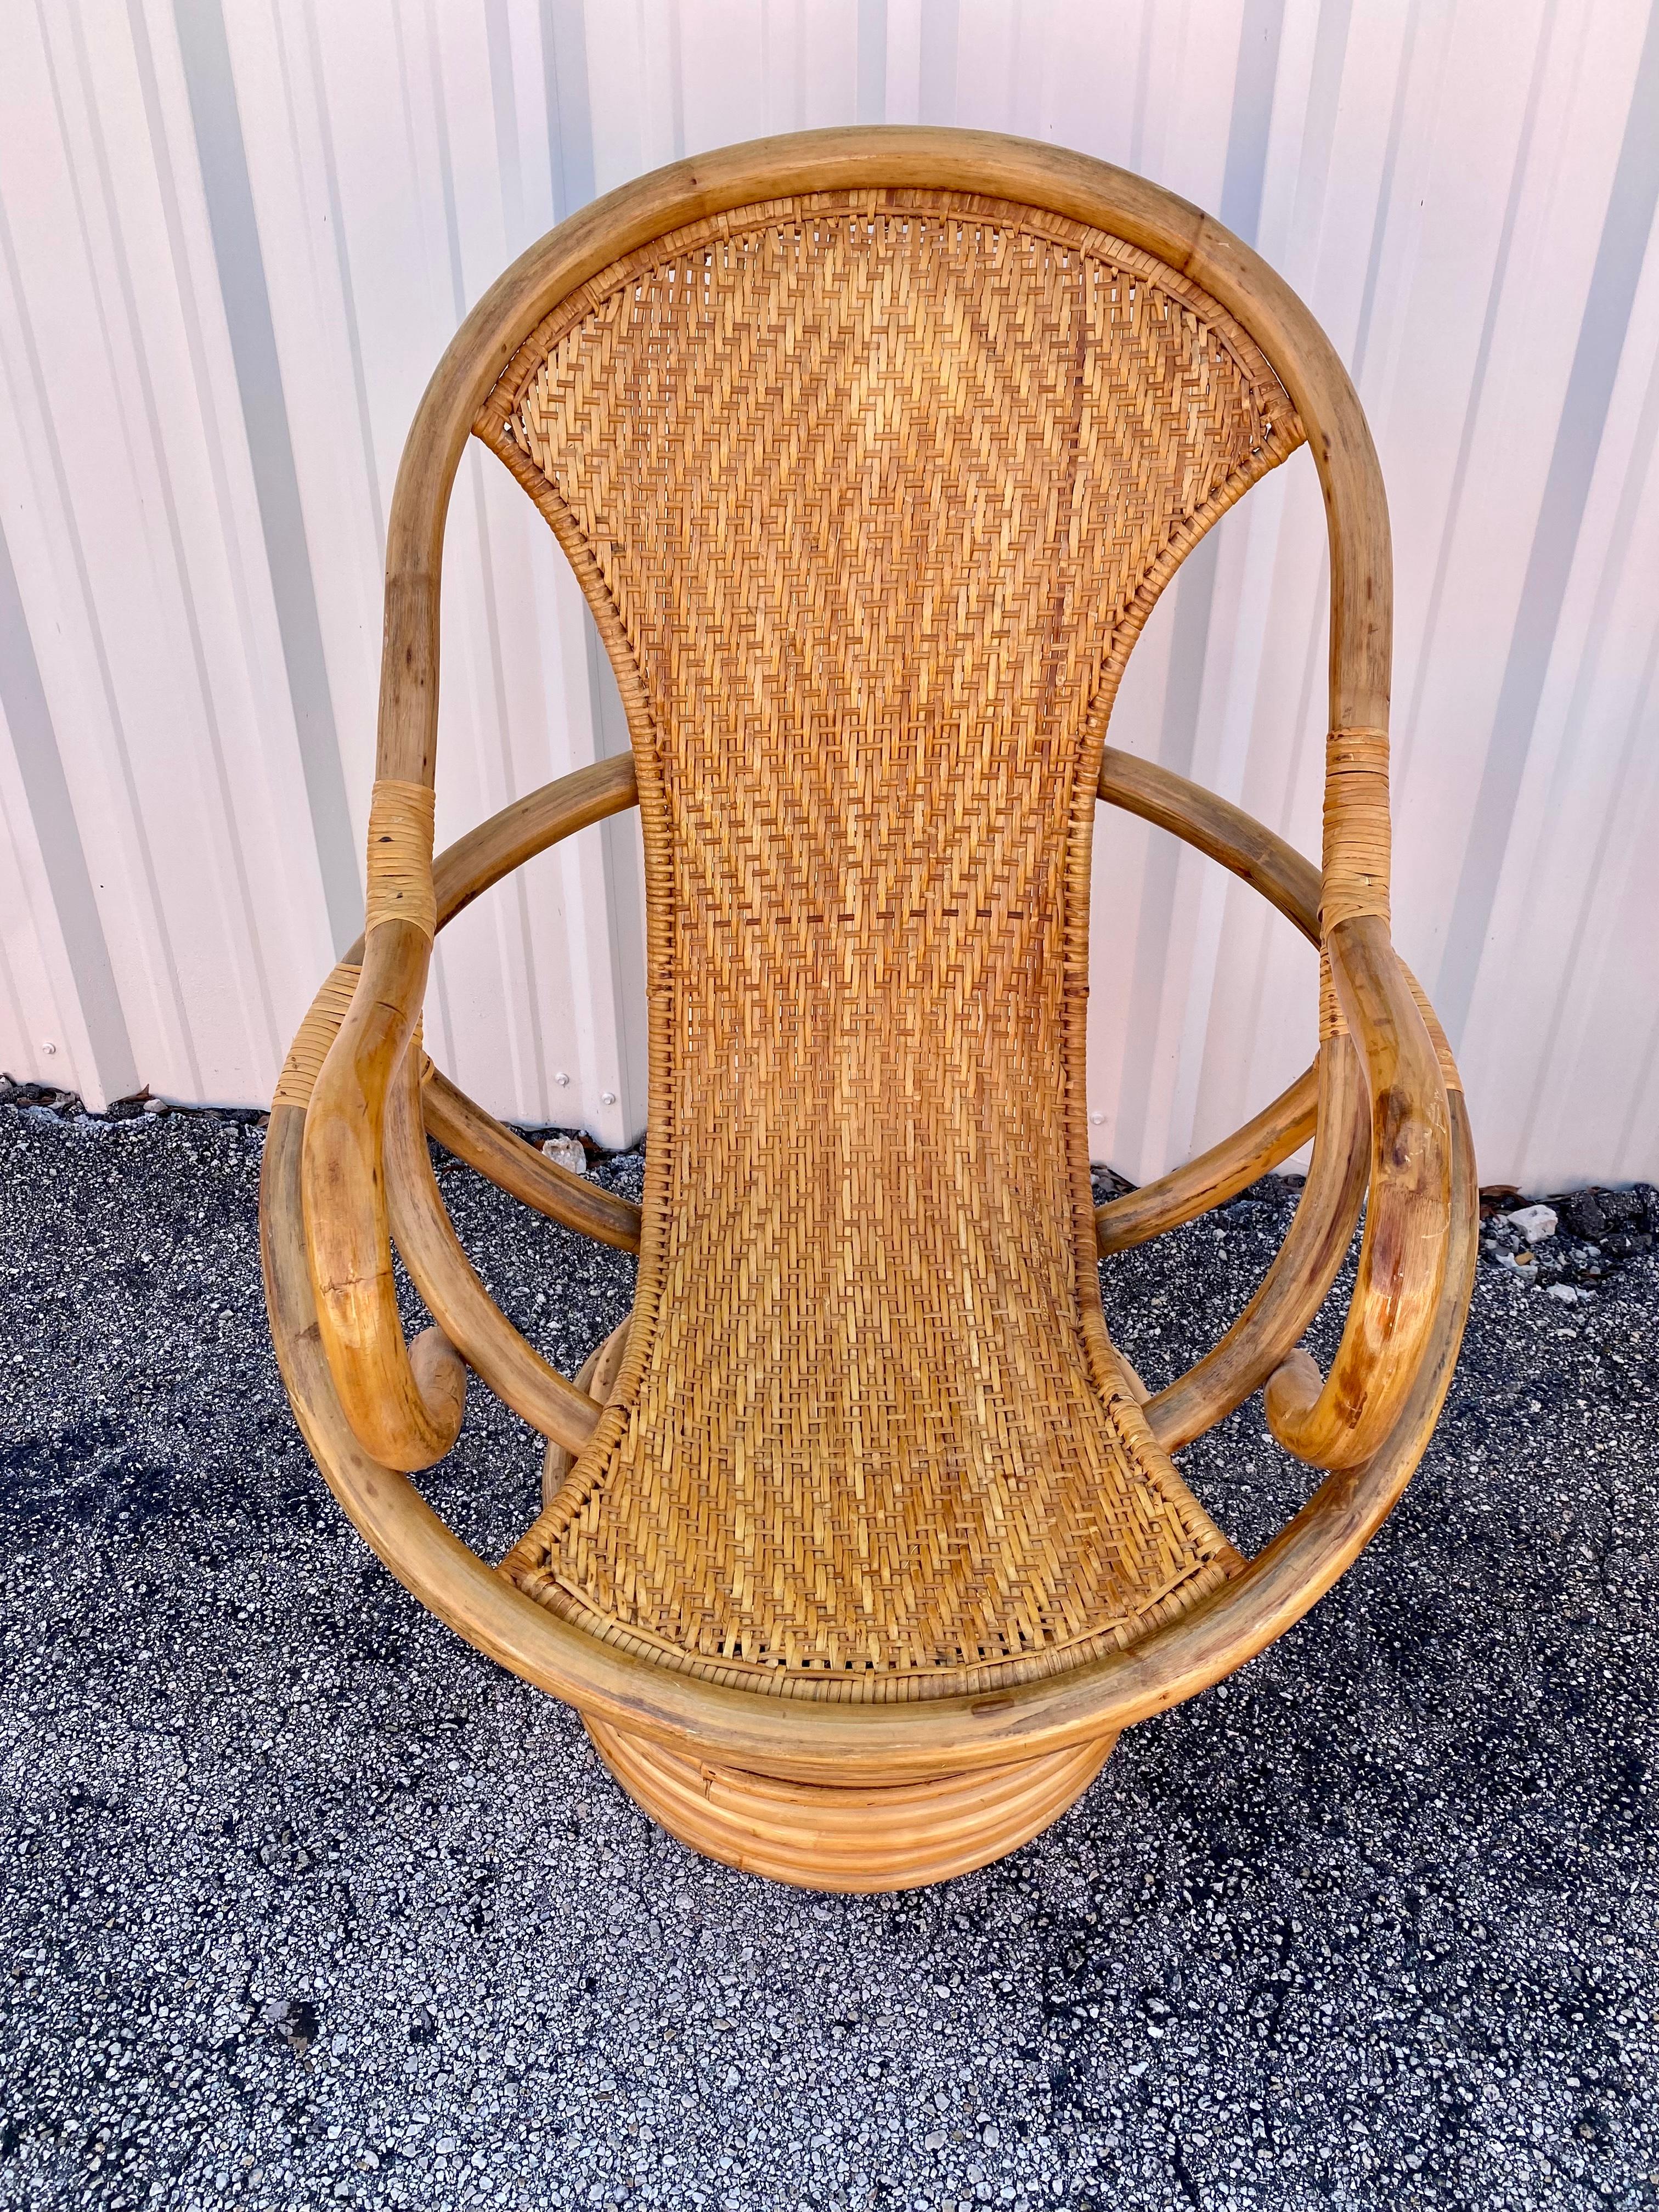 1980s Rattan Coastal Sculptural Swivel Chairs, set of 2 For Sale 6